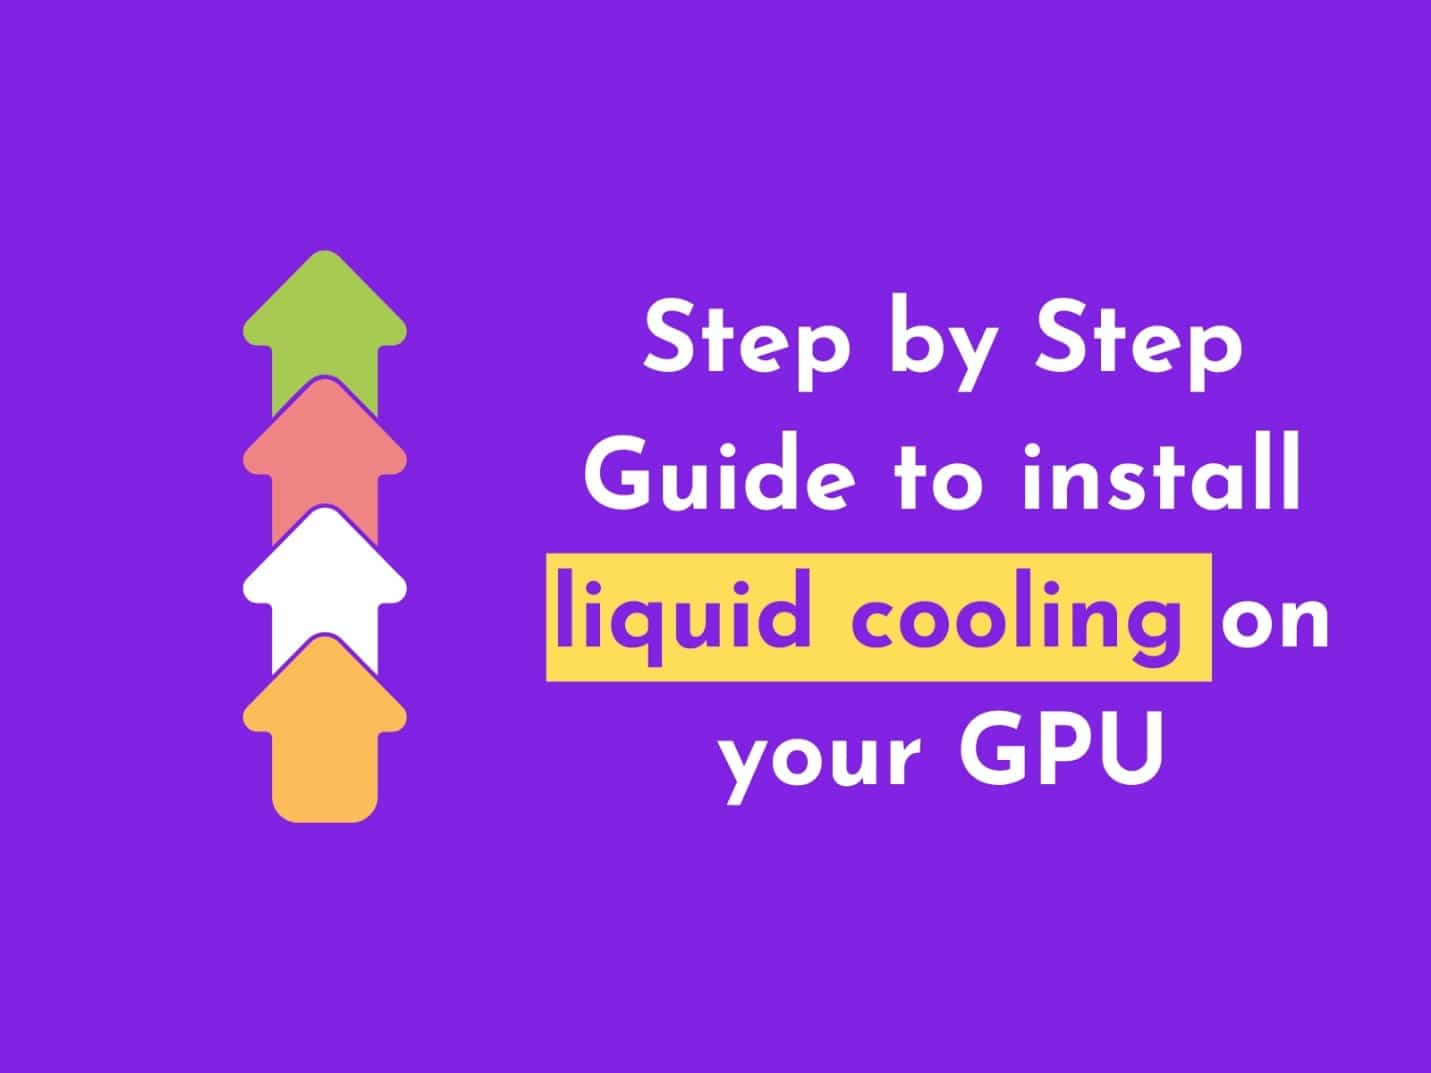 C:\Users\Mohsin\Downloads\What is thre process of Cooler\Step By Step Guide To Install Liquid Cooling System On Your GPU.jpg